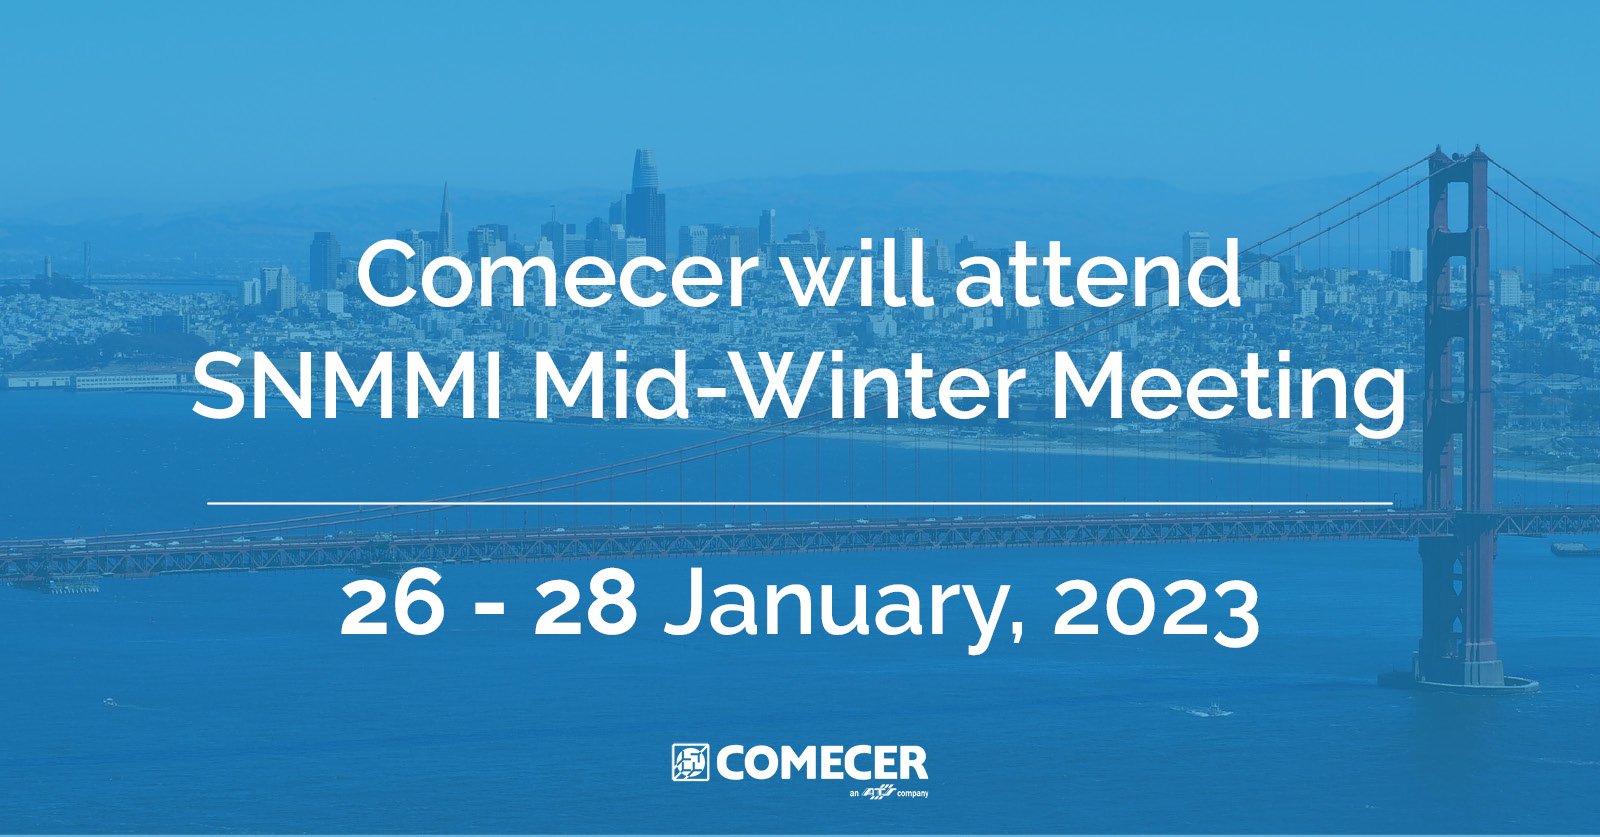 Comecer will attend SNMMI MidWinter Meeting